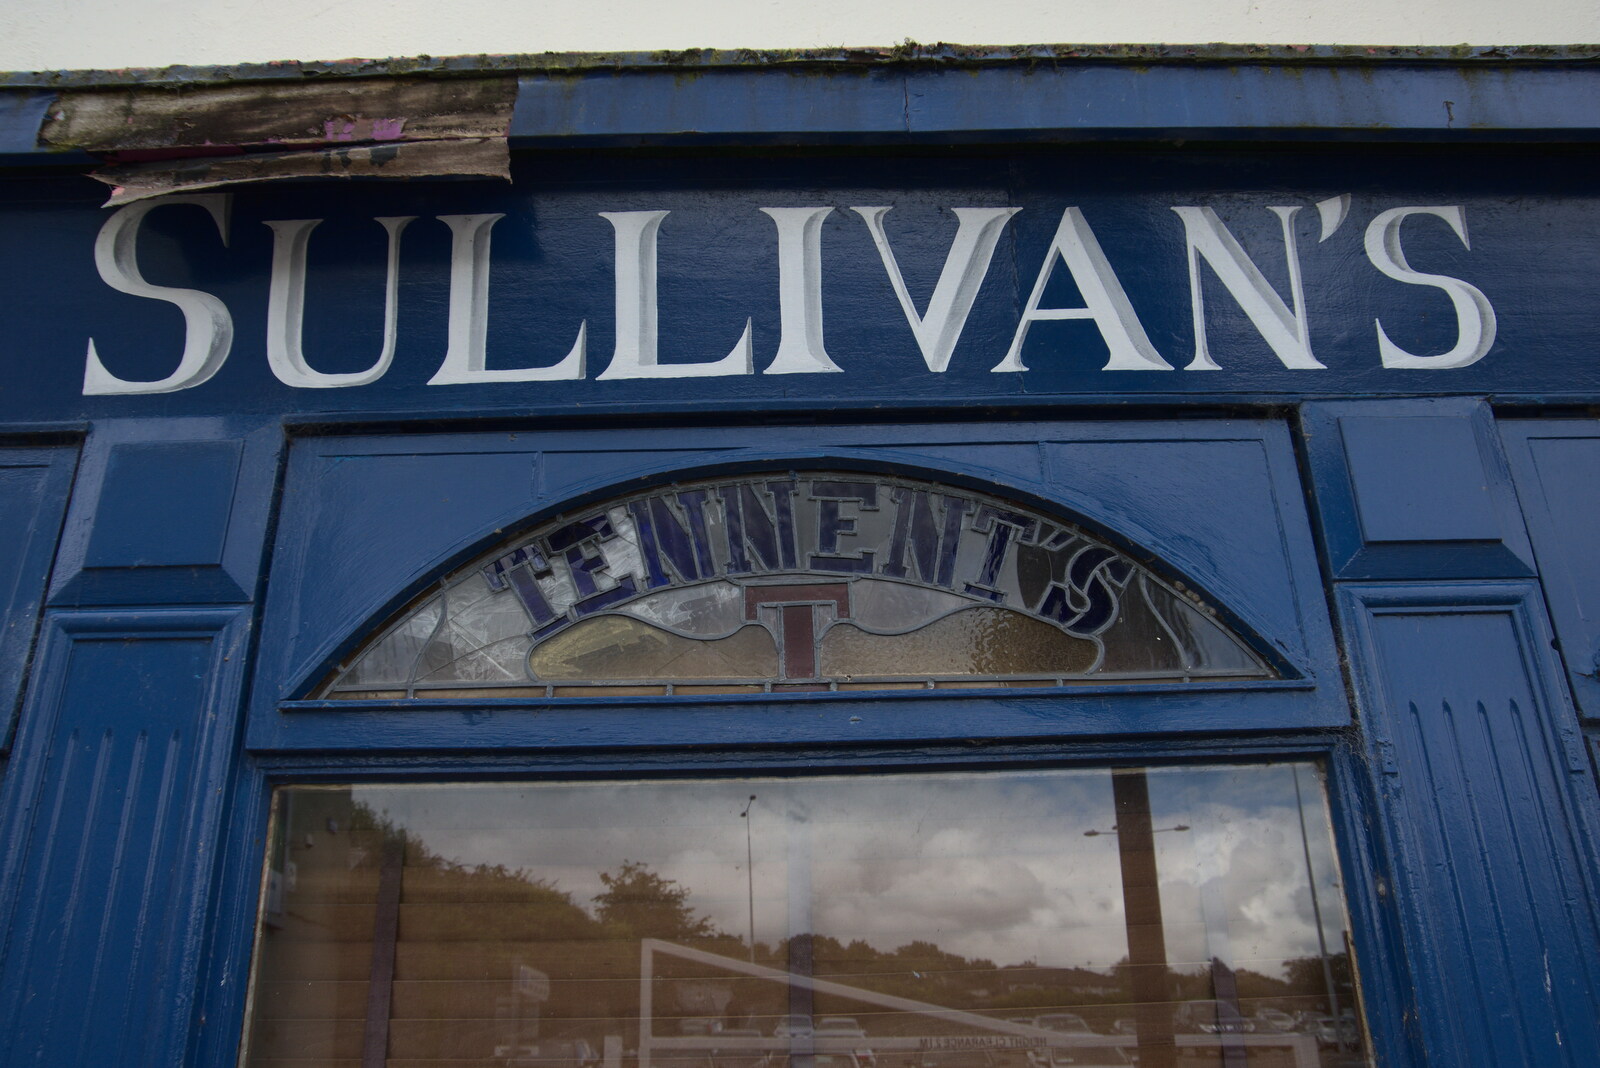 A Trip to Manorhamilton, County Leitrim, Ireland - 11th August 2021: Sullivan's, and some pub stained glass